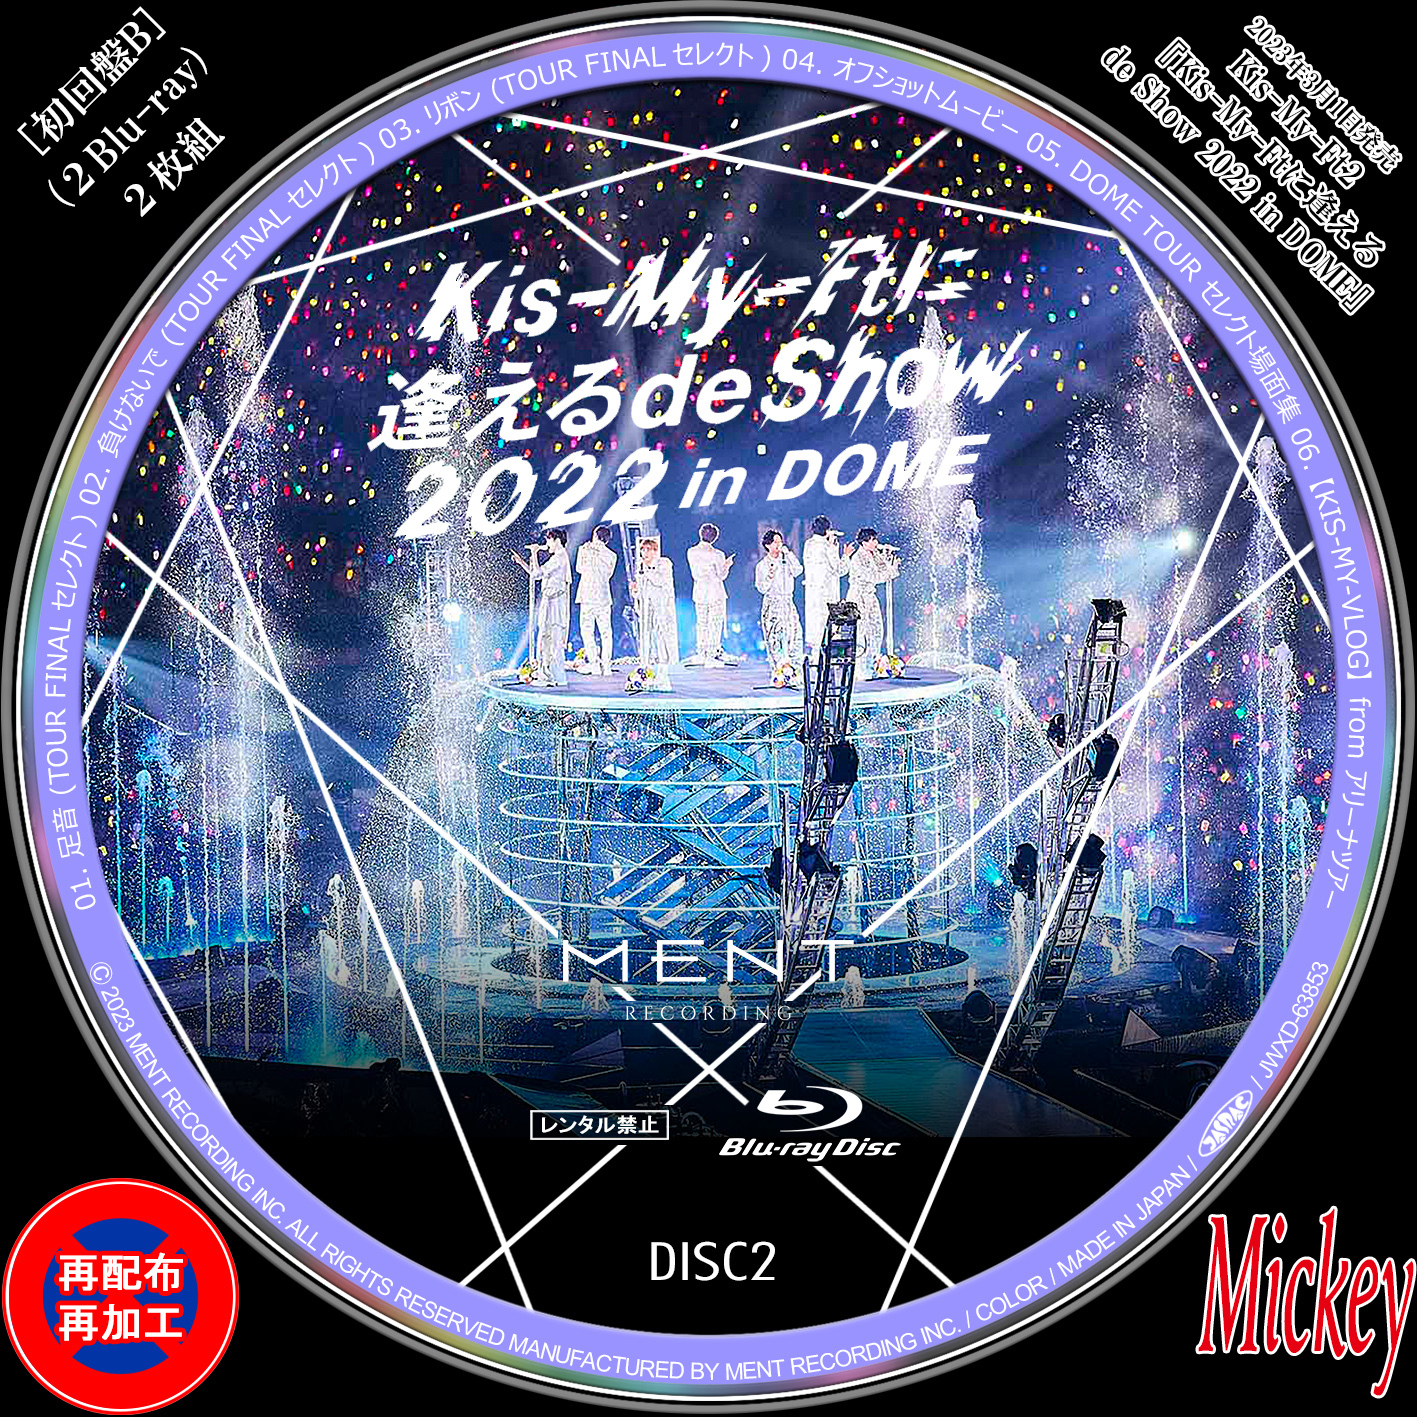 Kis-My-Ft2『Kis-My-Ftに逢える de Show 2022 in DOME』Blu-ray盤